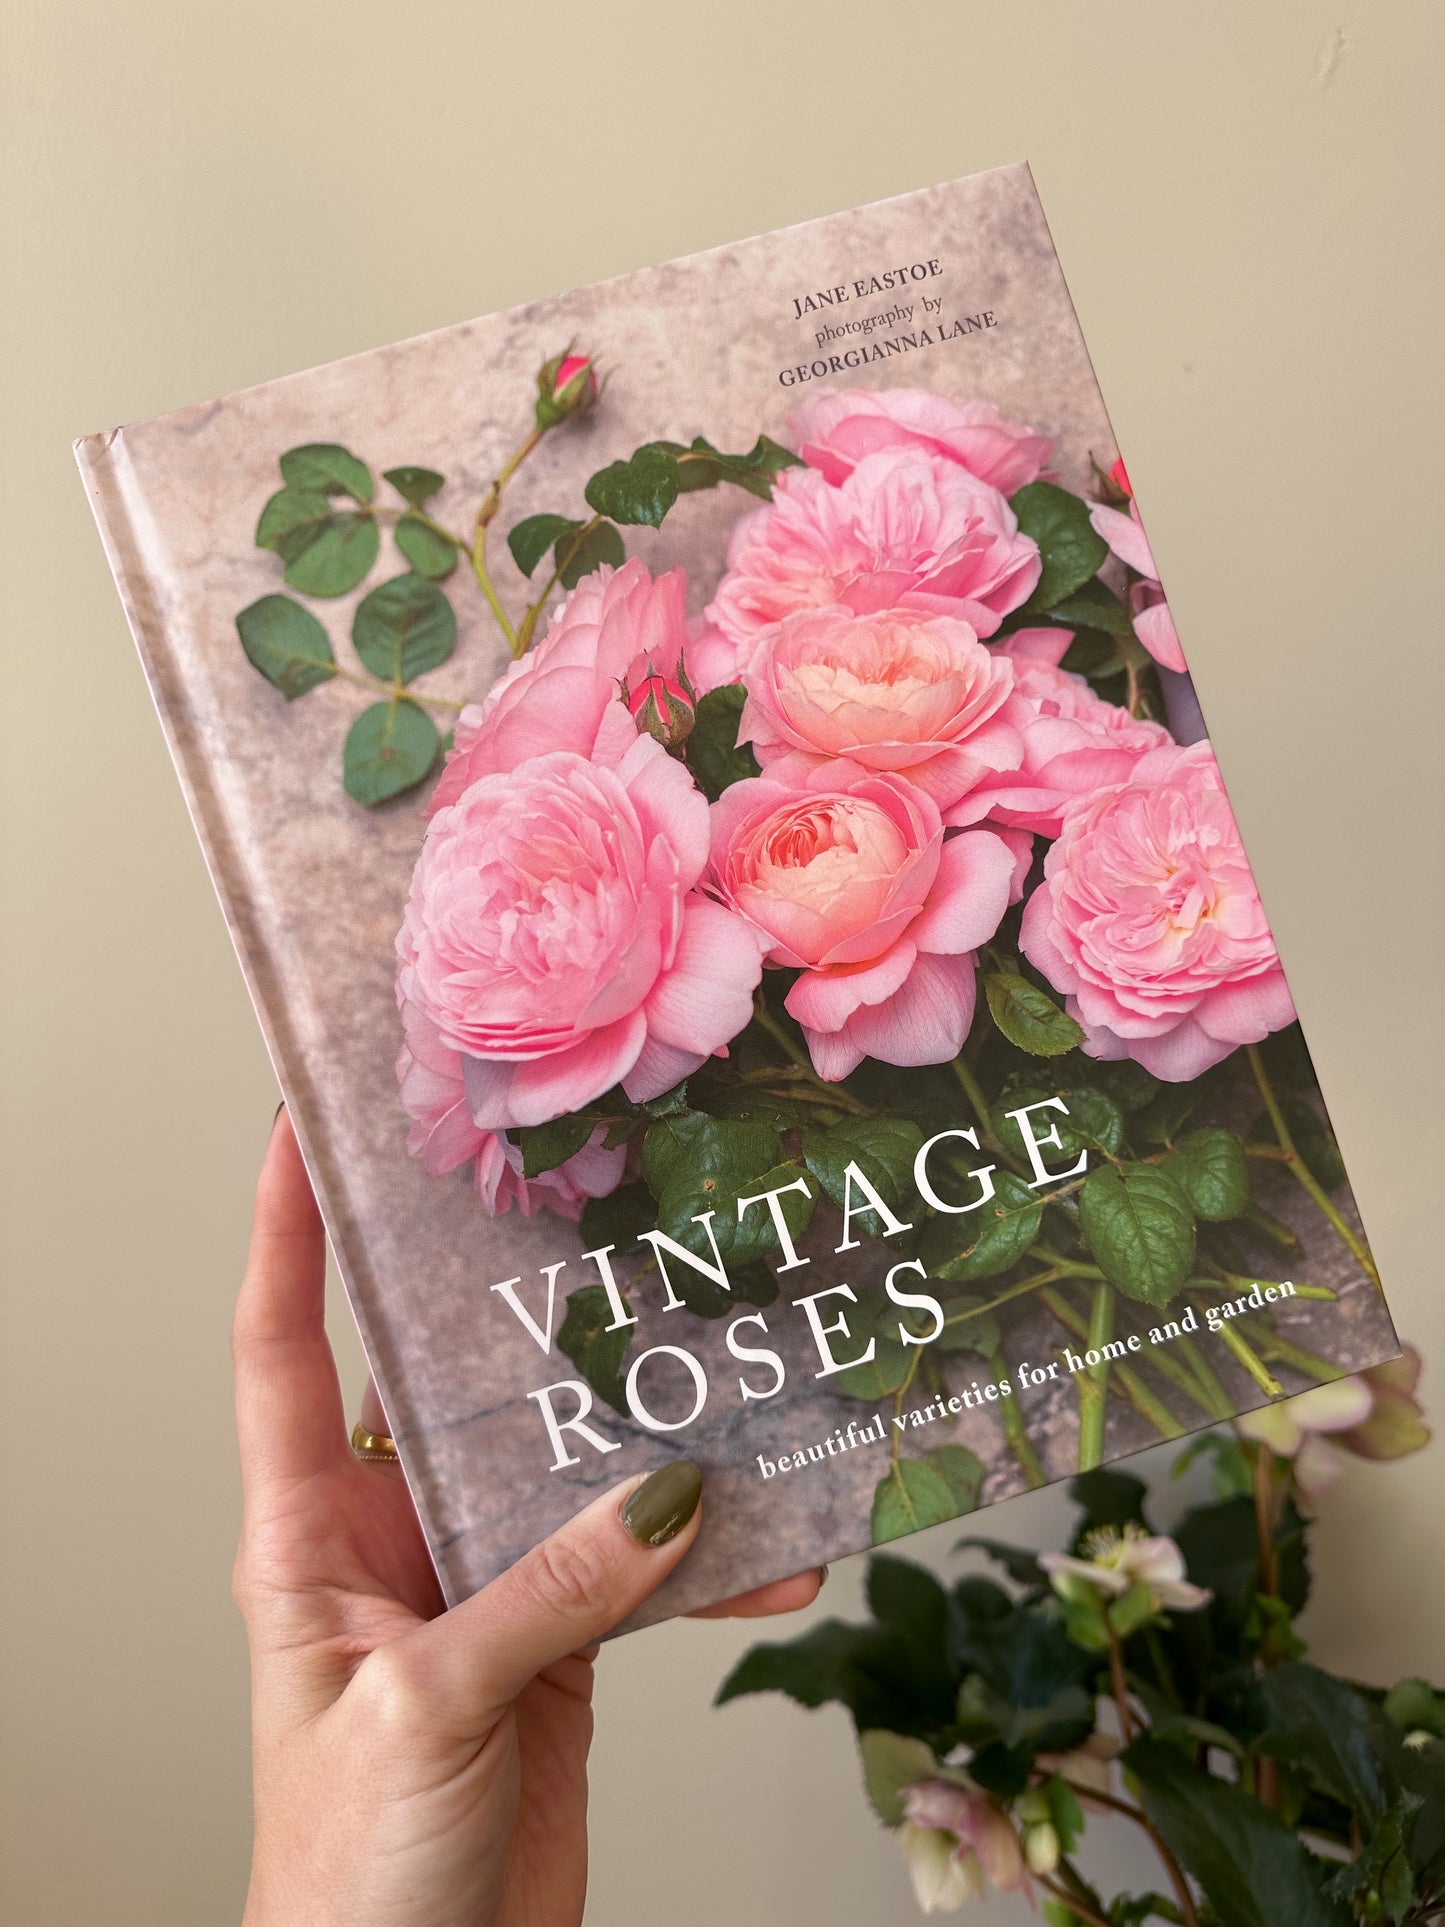 Vintage Roses : Beautiful Varieties for Home and Garden